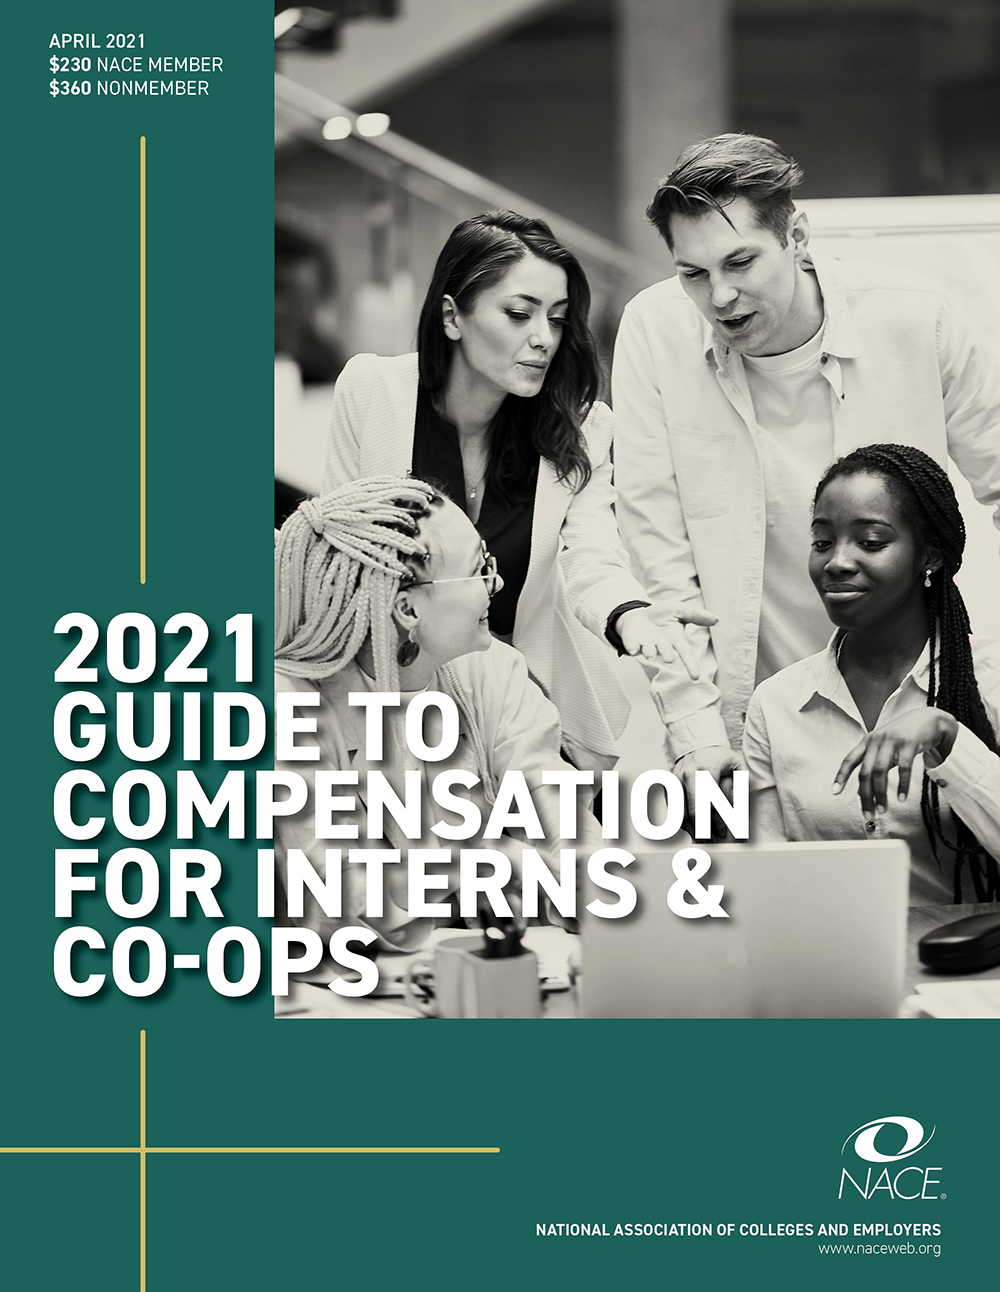 Guide to Compensation for Interns & Co-ops